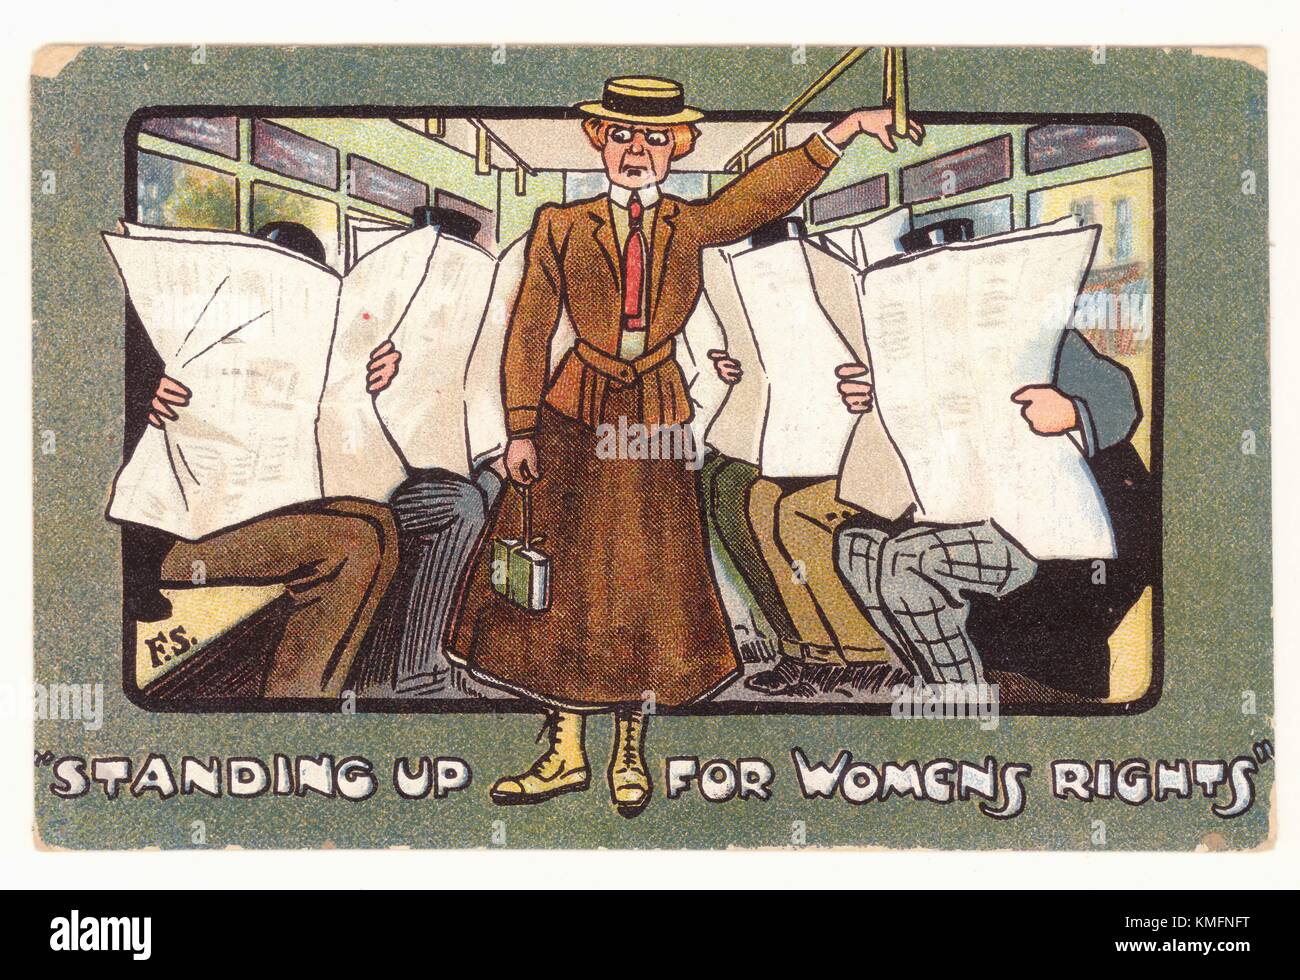 Original Edwardian era propaganda comic picture postcard (Suffragette theme)  - standing up for women's rights - anti-suffragette card, typically depicting the campaigning woman as unattractive and dowdy, and not worthy of the men giving up their seat for her. U.K. 1907. Stock Photo